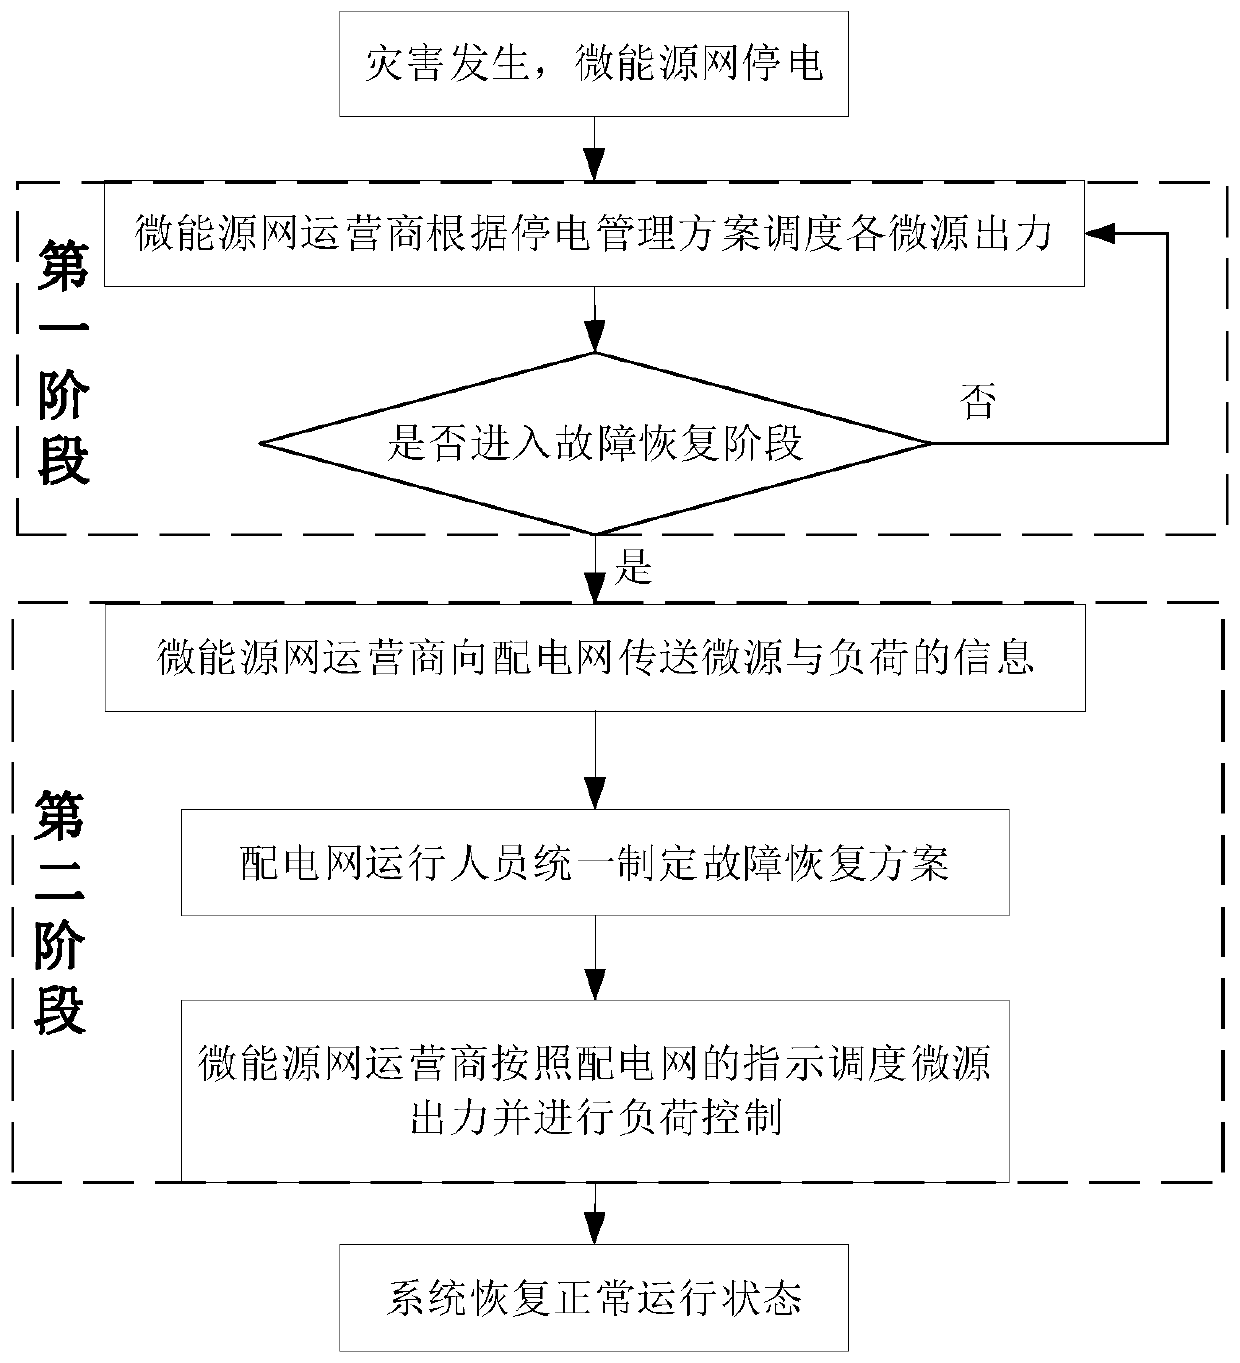 Elasticity lifting method for distribution network considering micro-energy network support function